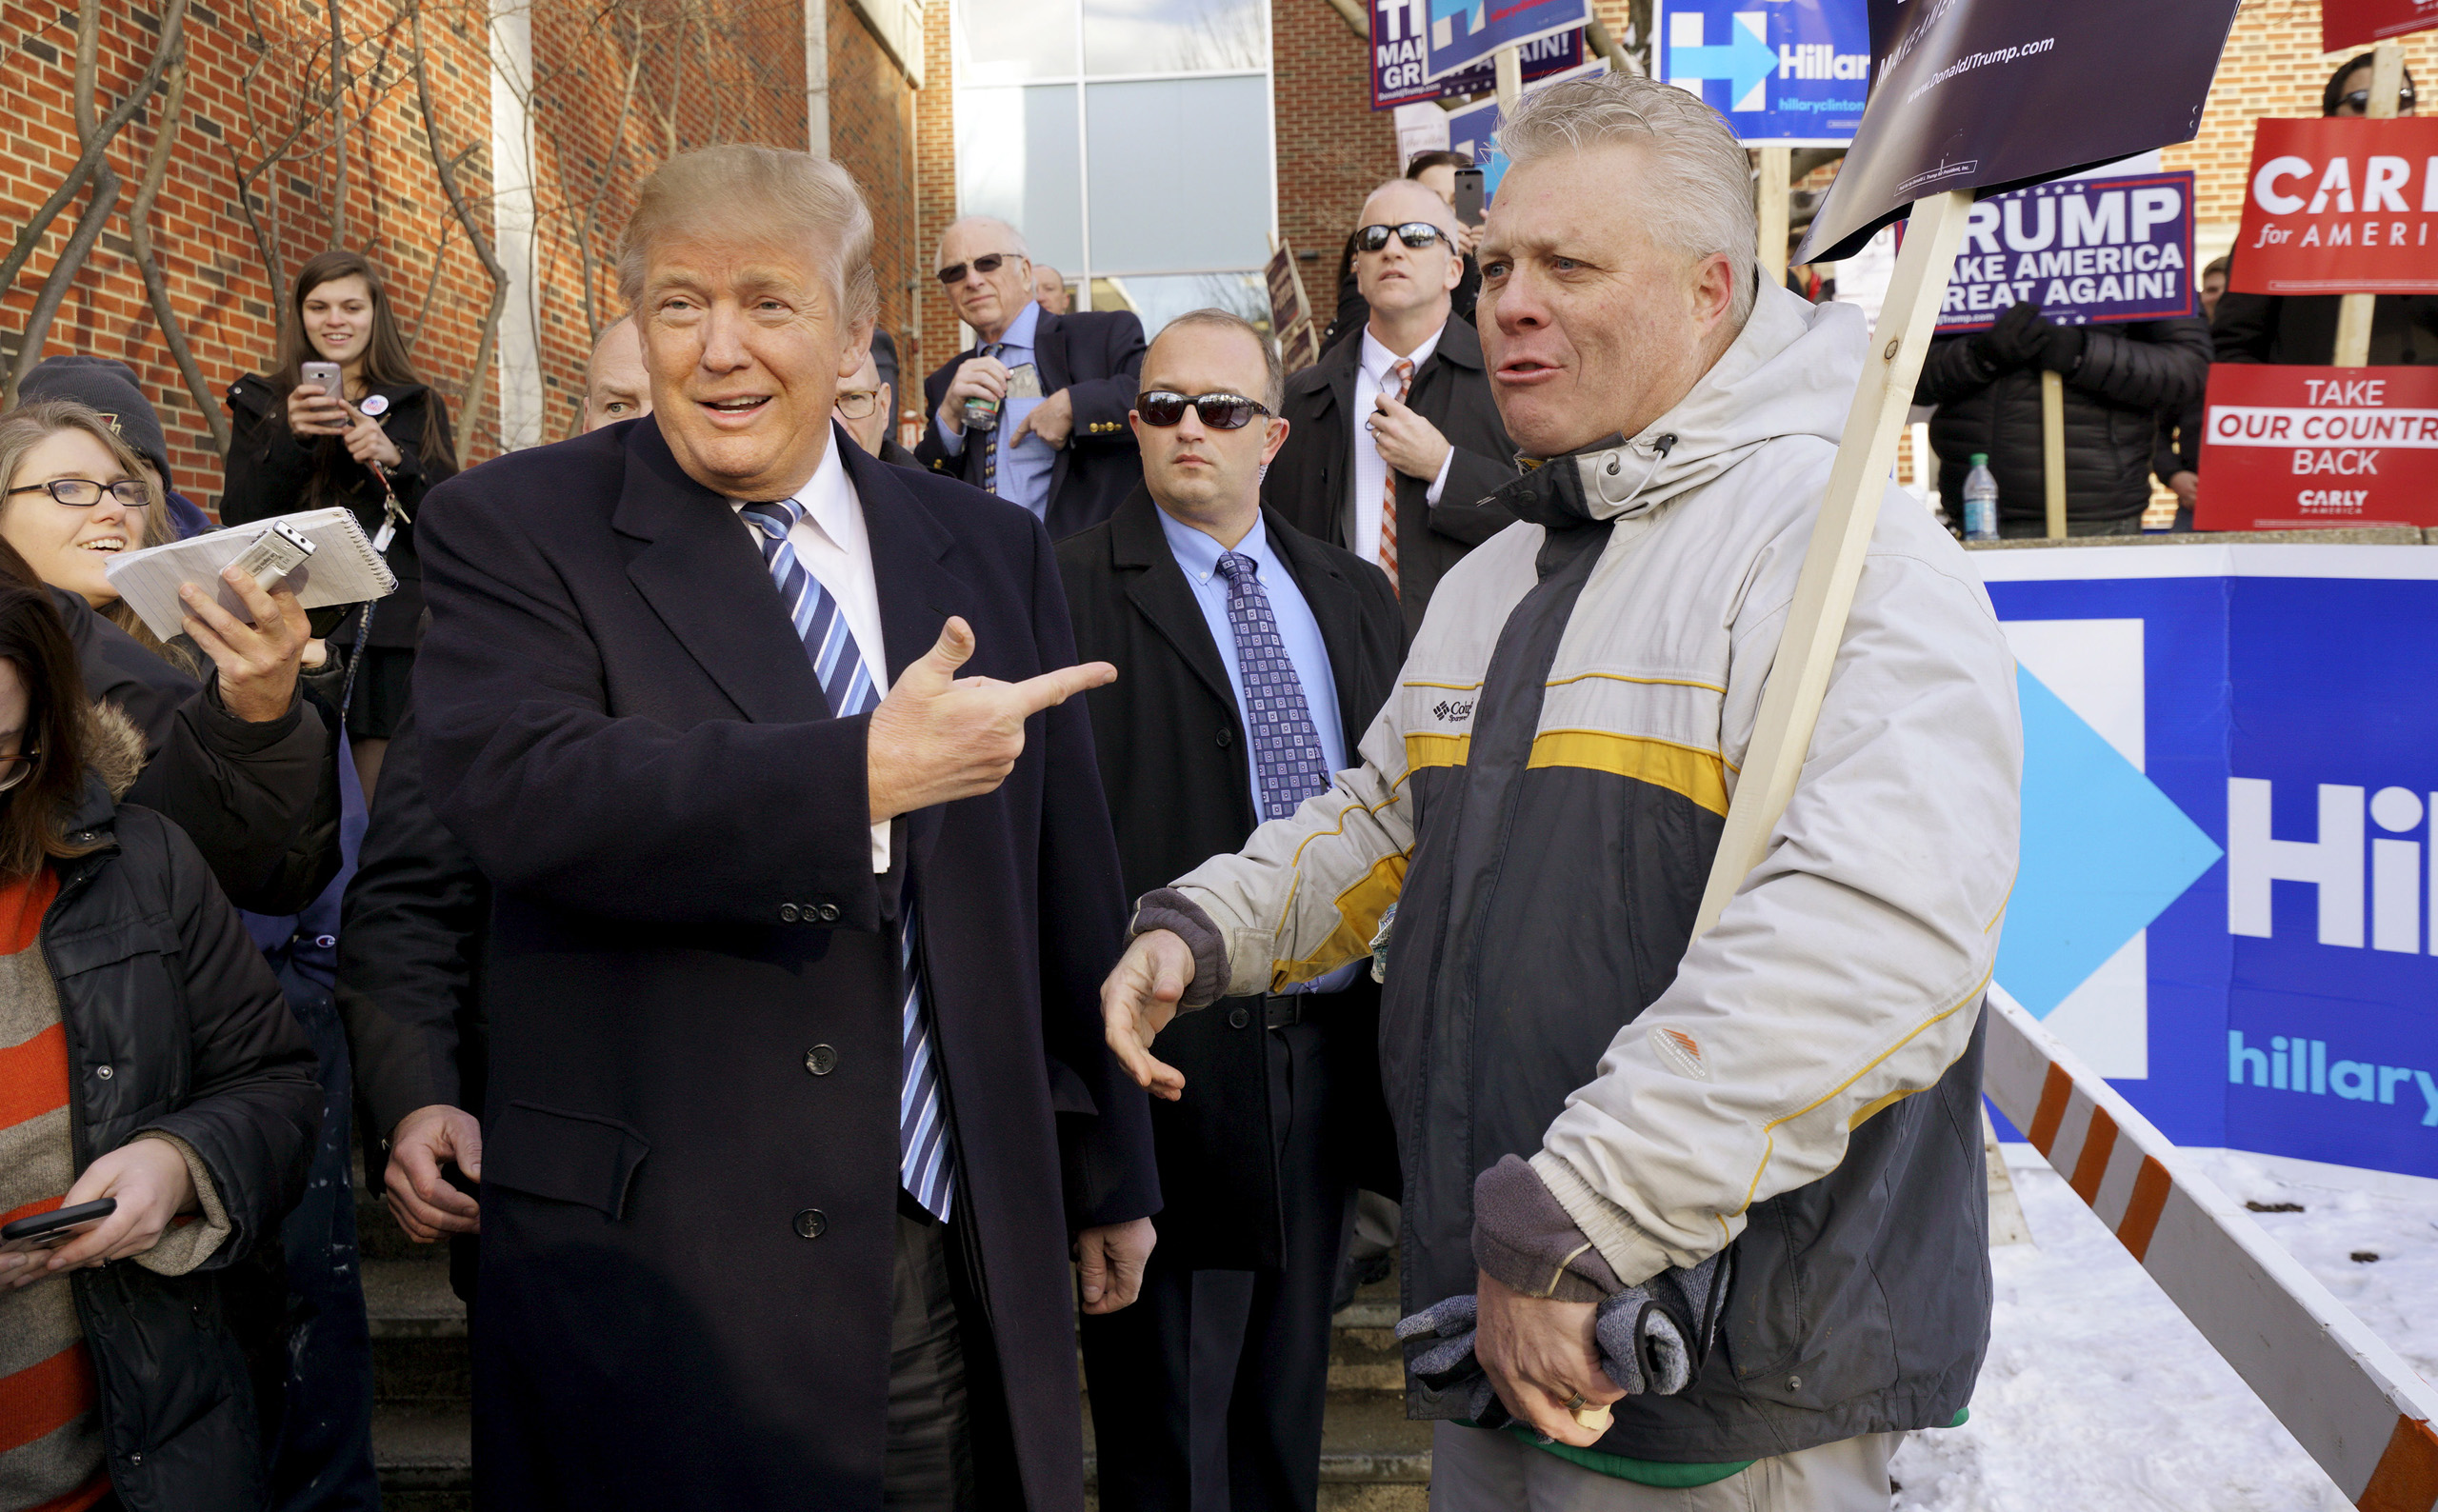 Republican presidential candidate Donald Trump points at a supporter at a polling place for the presidential primary in Manchester, N.H. on Feb. 9, 2016.